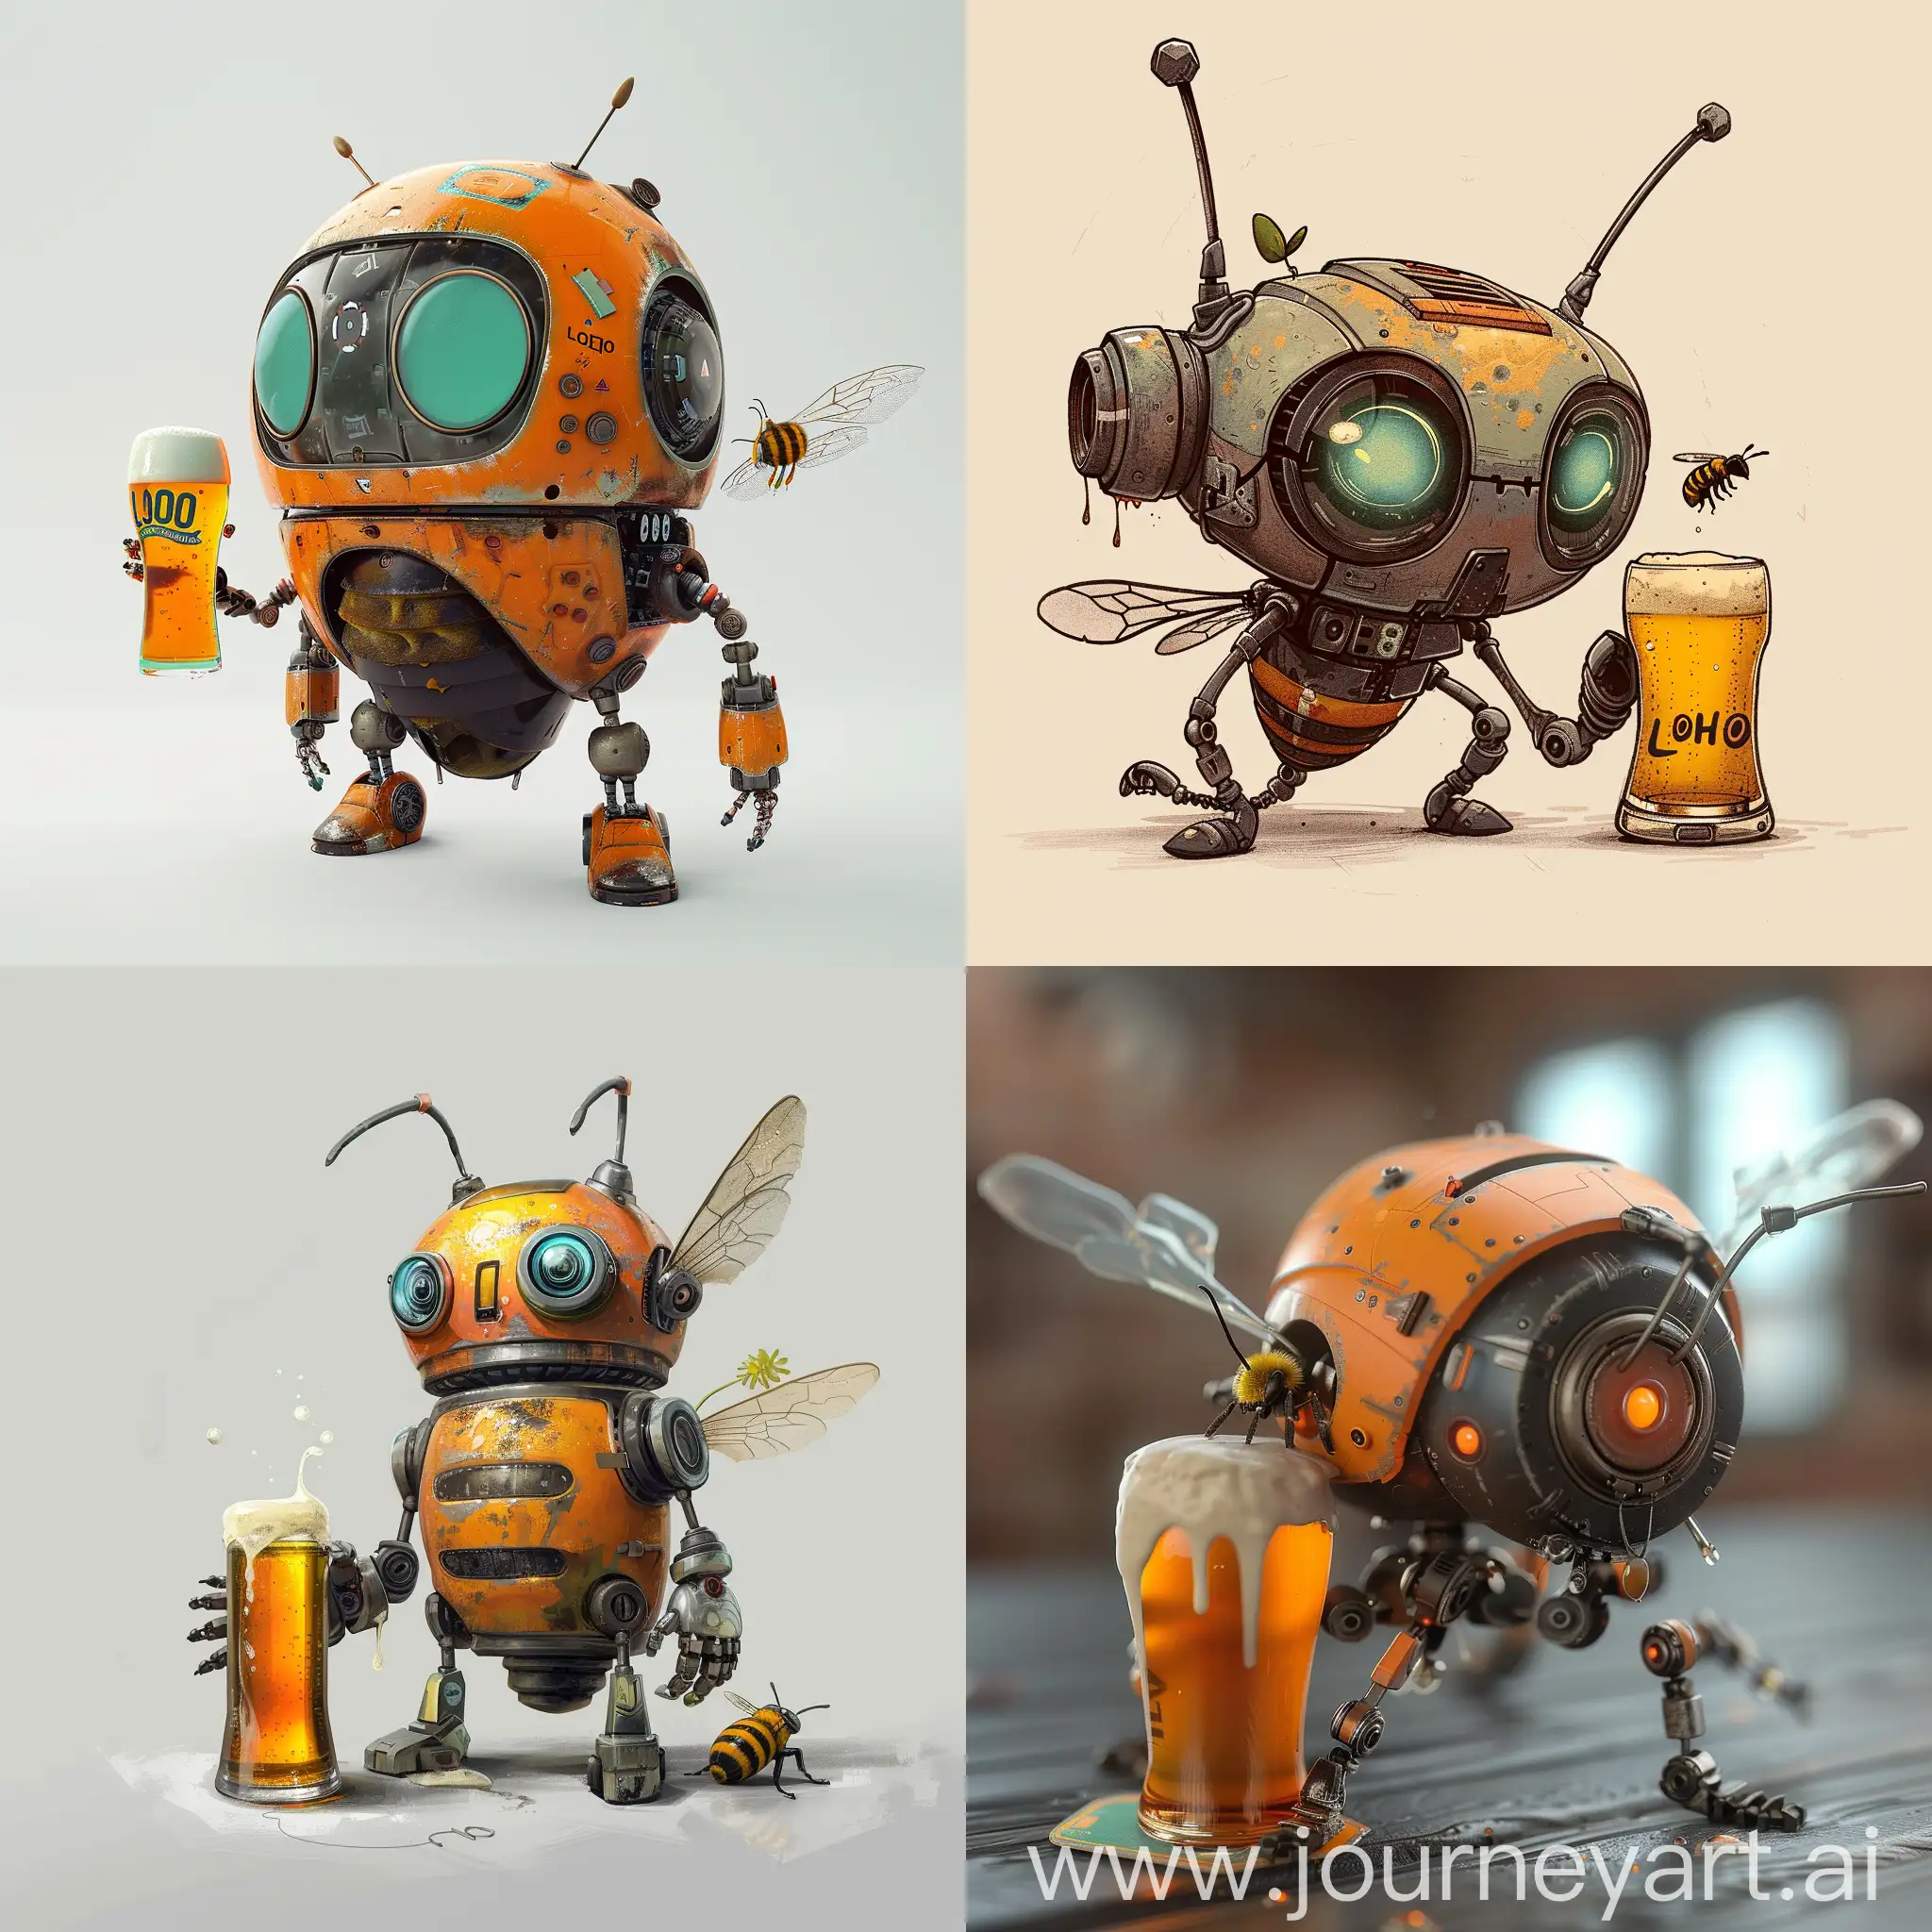 Small-RobotBee-with-Beer-Playful-and-Whimsical-Robotic-Insect-Enjoying-a-Beverage